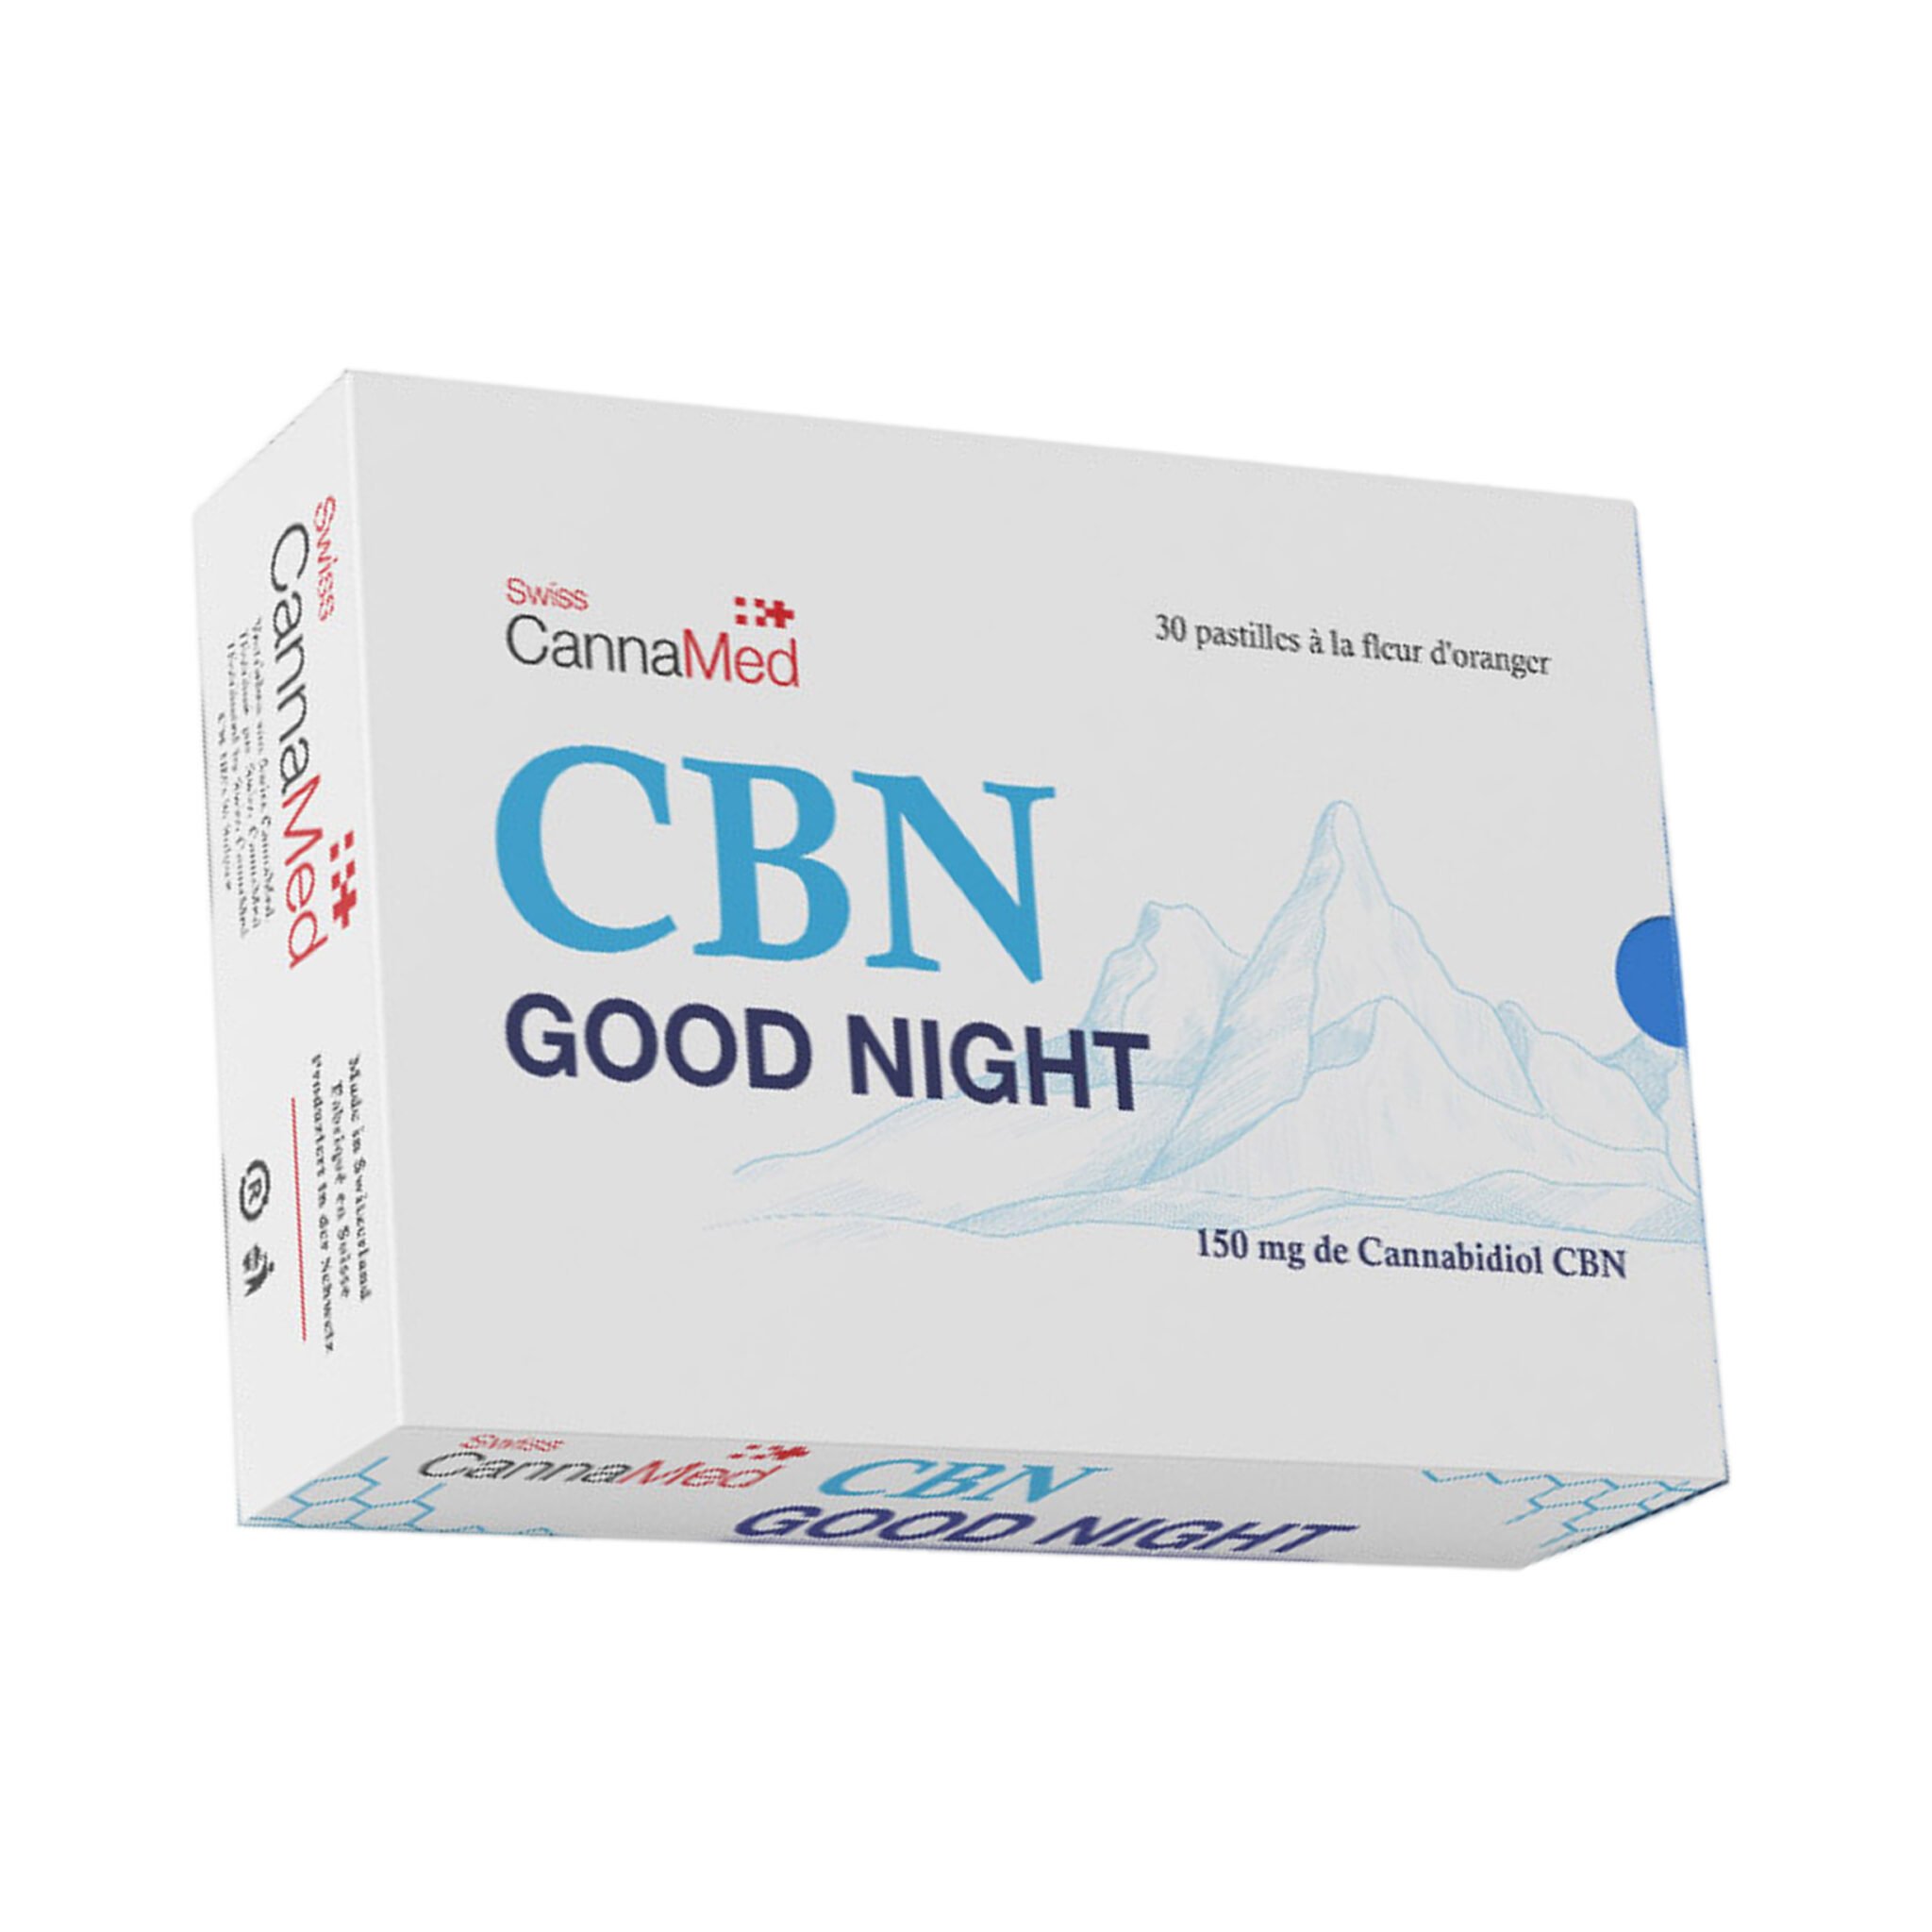 Swiss CannaMed CBN Good Night, New Arrivals